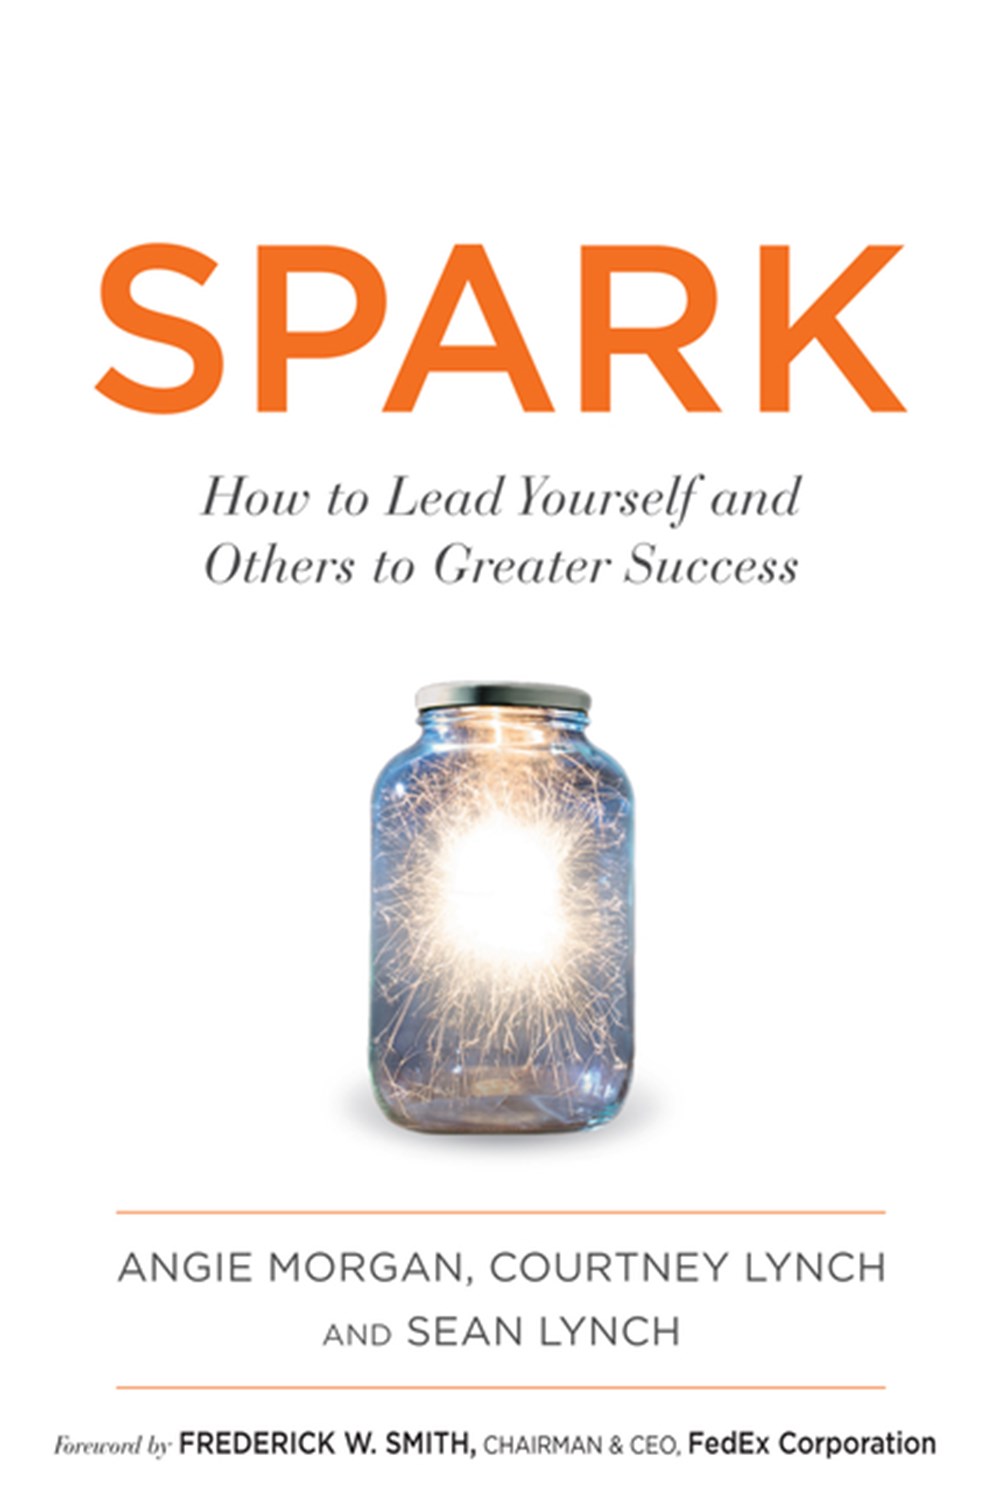 Spark: How to Lead Yourself and Others to Greater Success